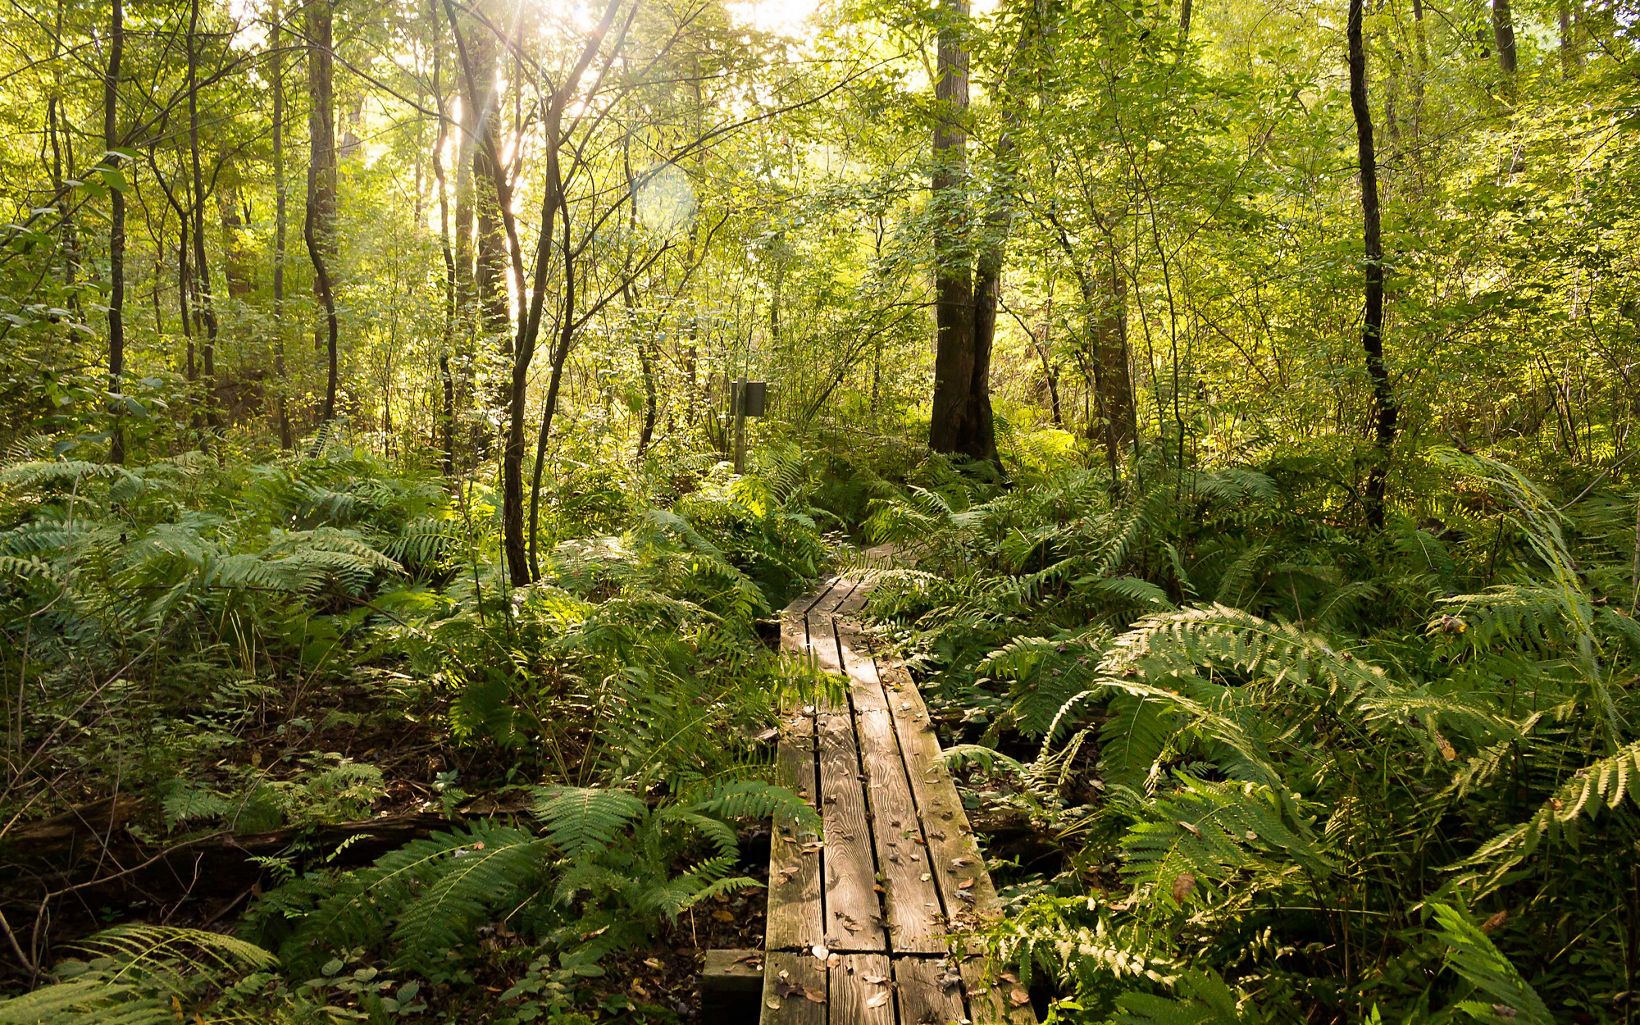 Ferns cover the forest floor of Brown's Lake Bog along the board walk as the sun shines through the trees.